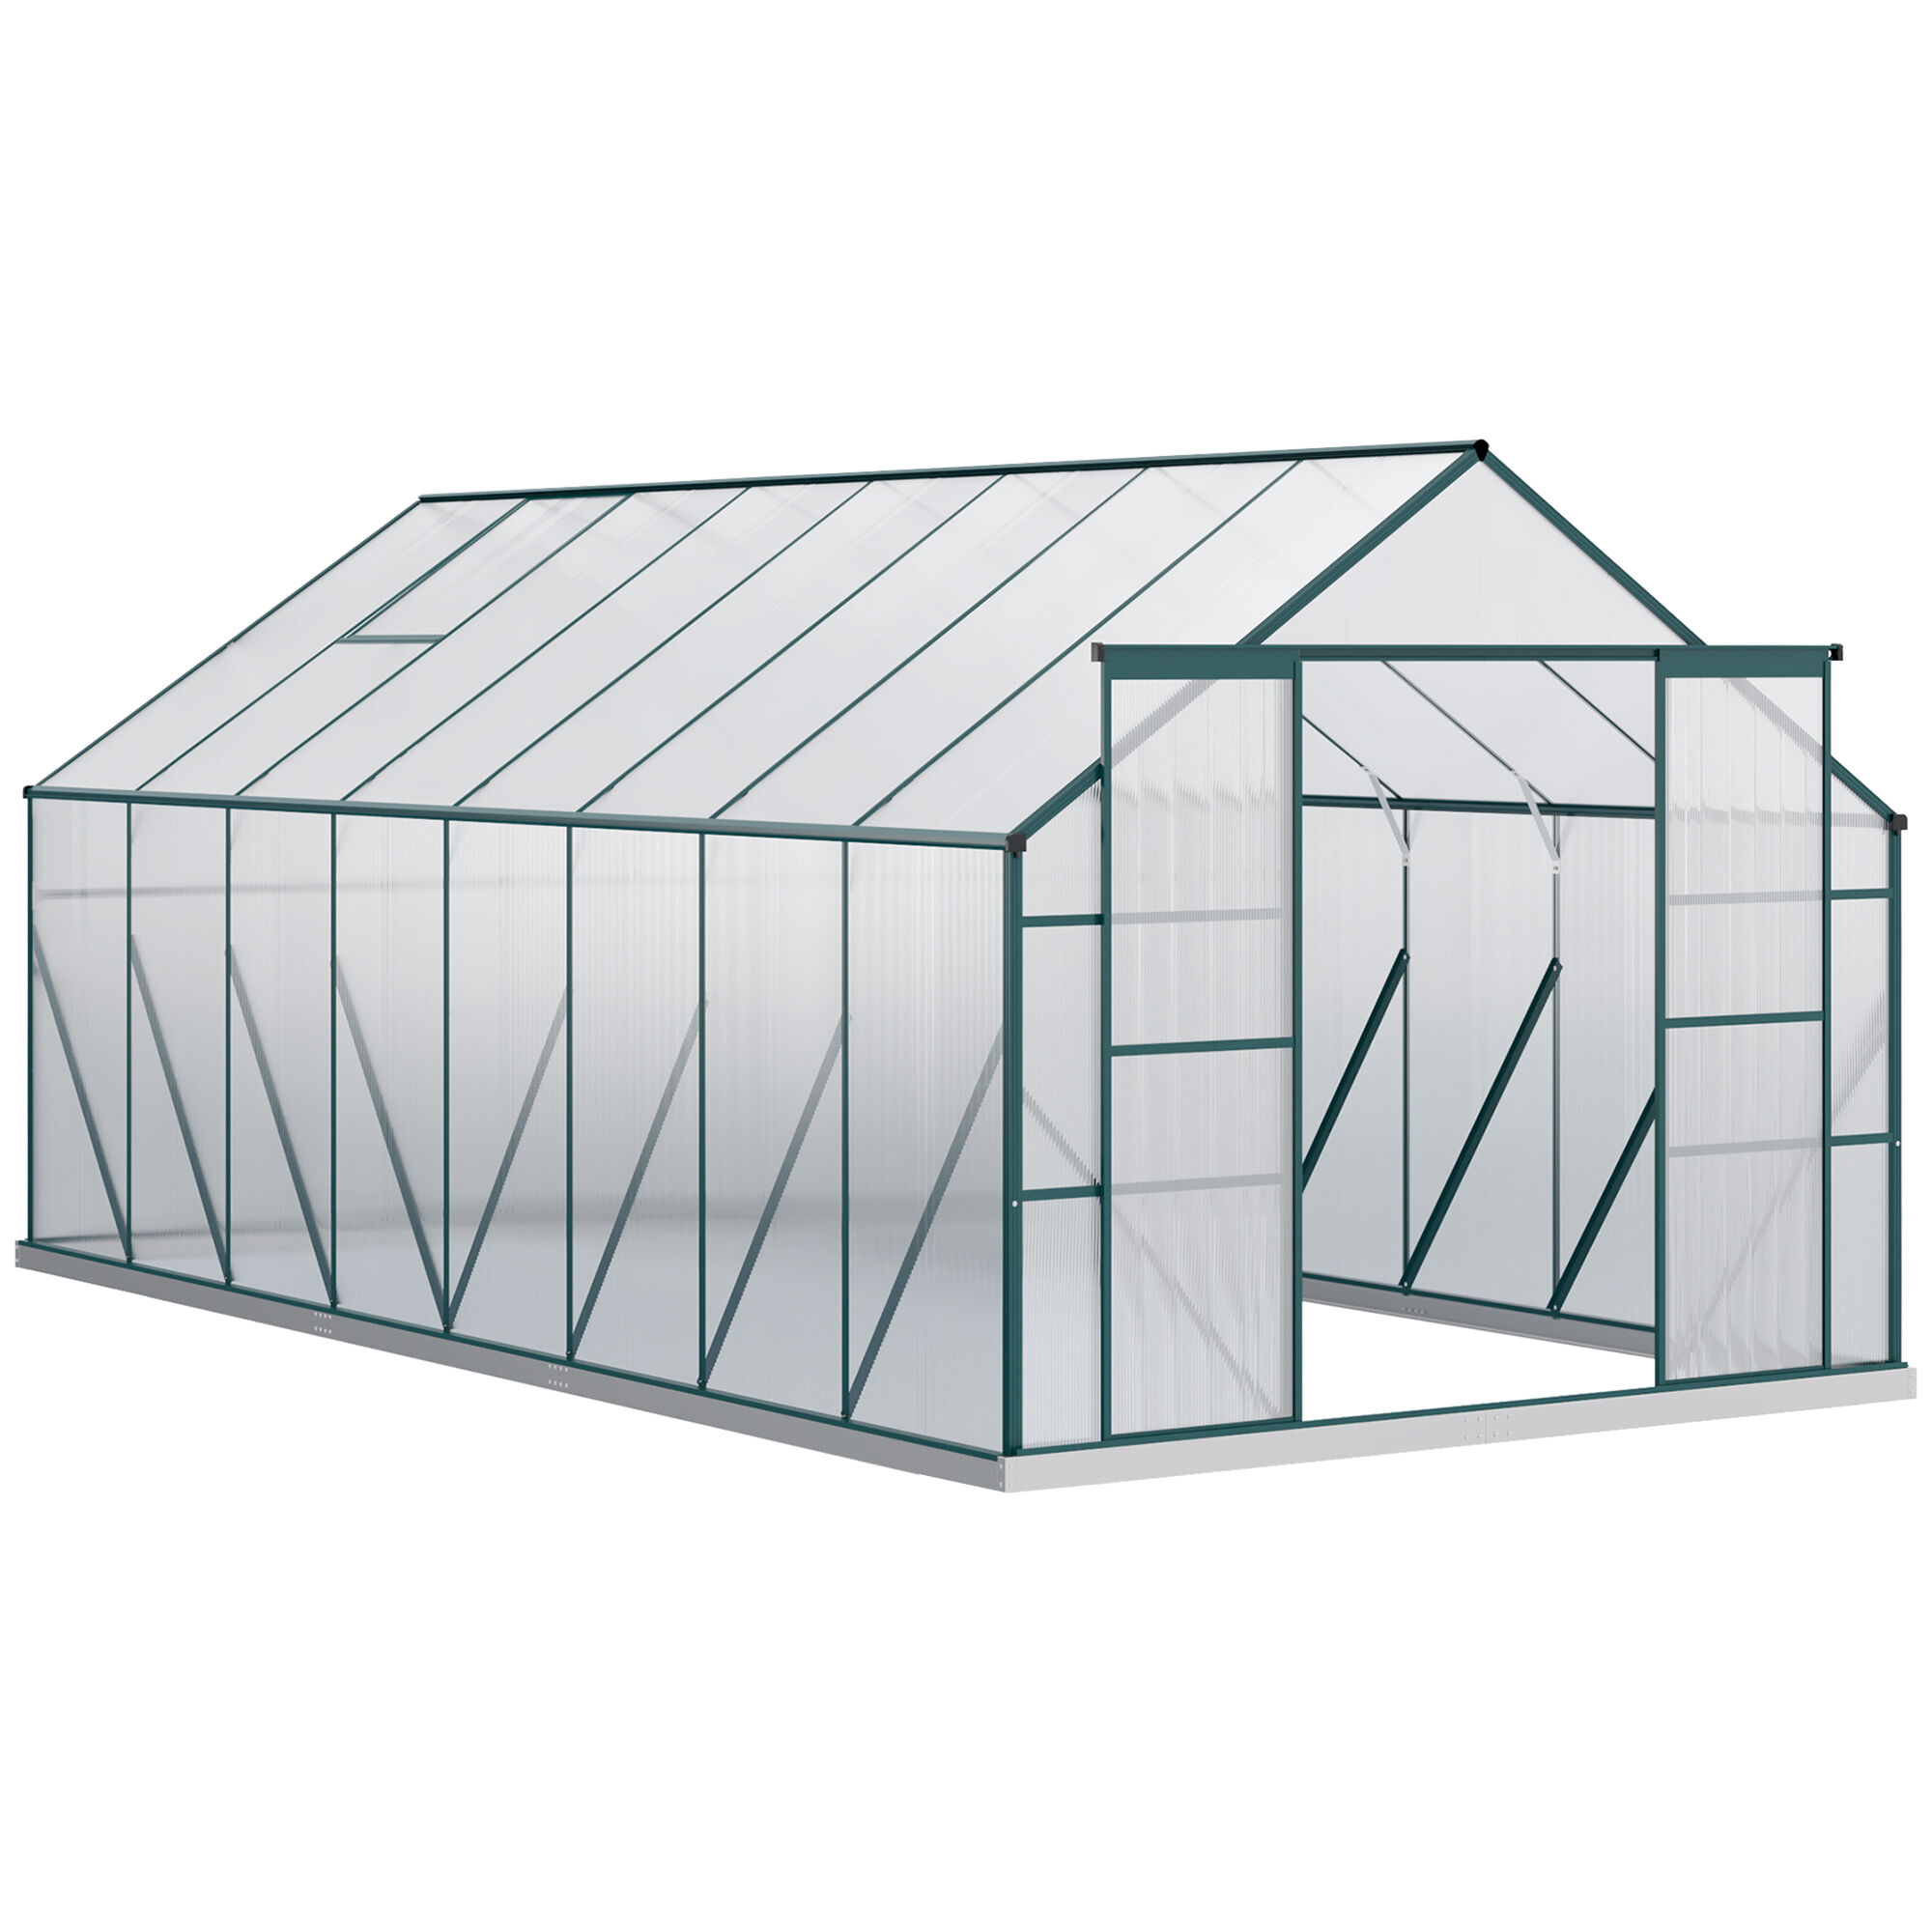 Outsunny 16' x 8' Aluminum Greenhouse, Walk-in Garden Greenhouse Kit with Adjustable Roof Vent, Rain Gutter and Sliding Door for Winter, Clear